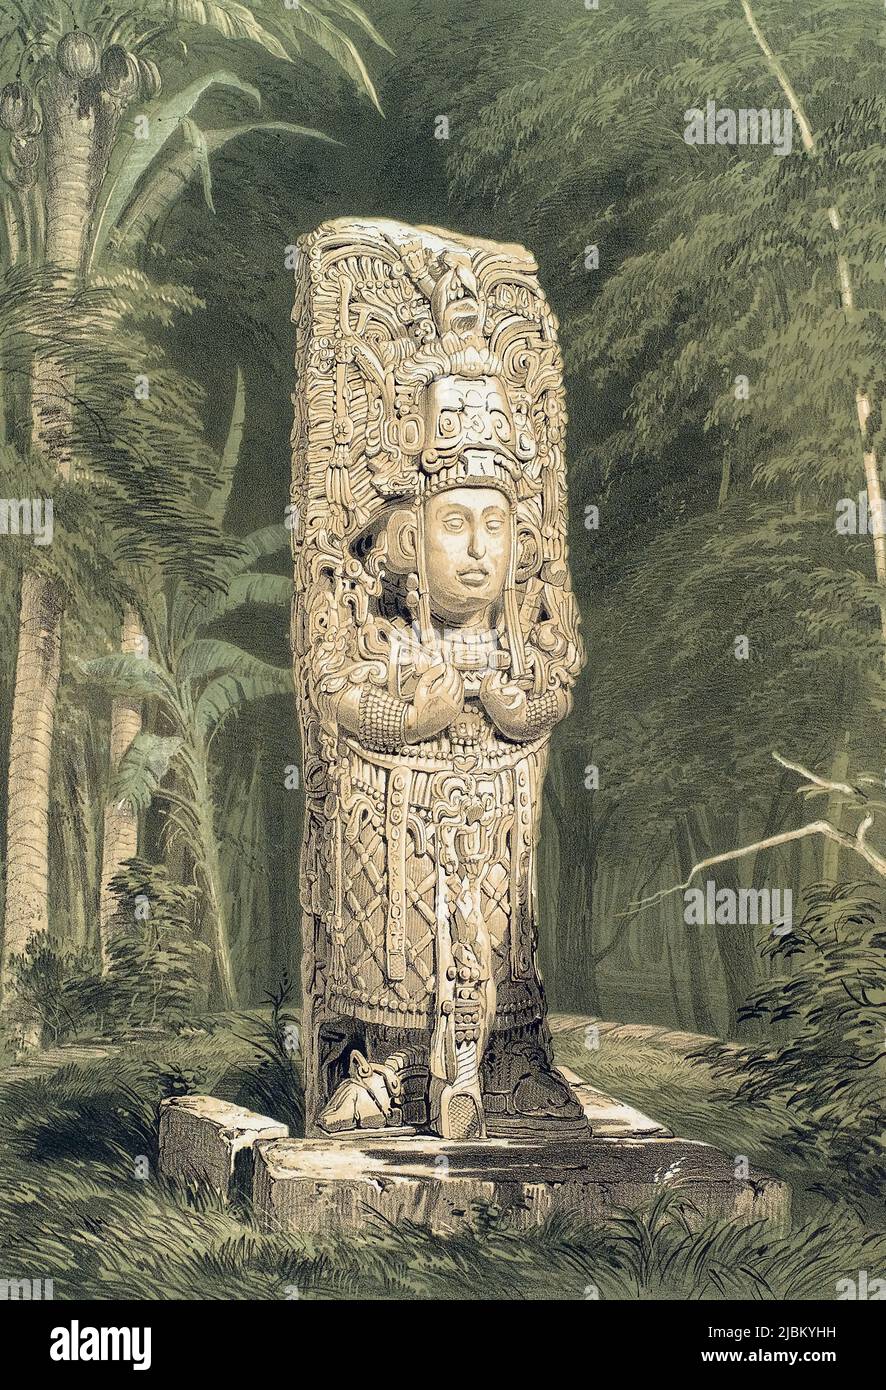 An idol at Copan, Honduras.  After a work by Frederick Catherwood.  The Mayan idol at the Mayan city is known as Stela H and represents king Uaxaclajuun Ub'aah K'awiil.  It dates from the 8th century. Stock Photo